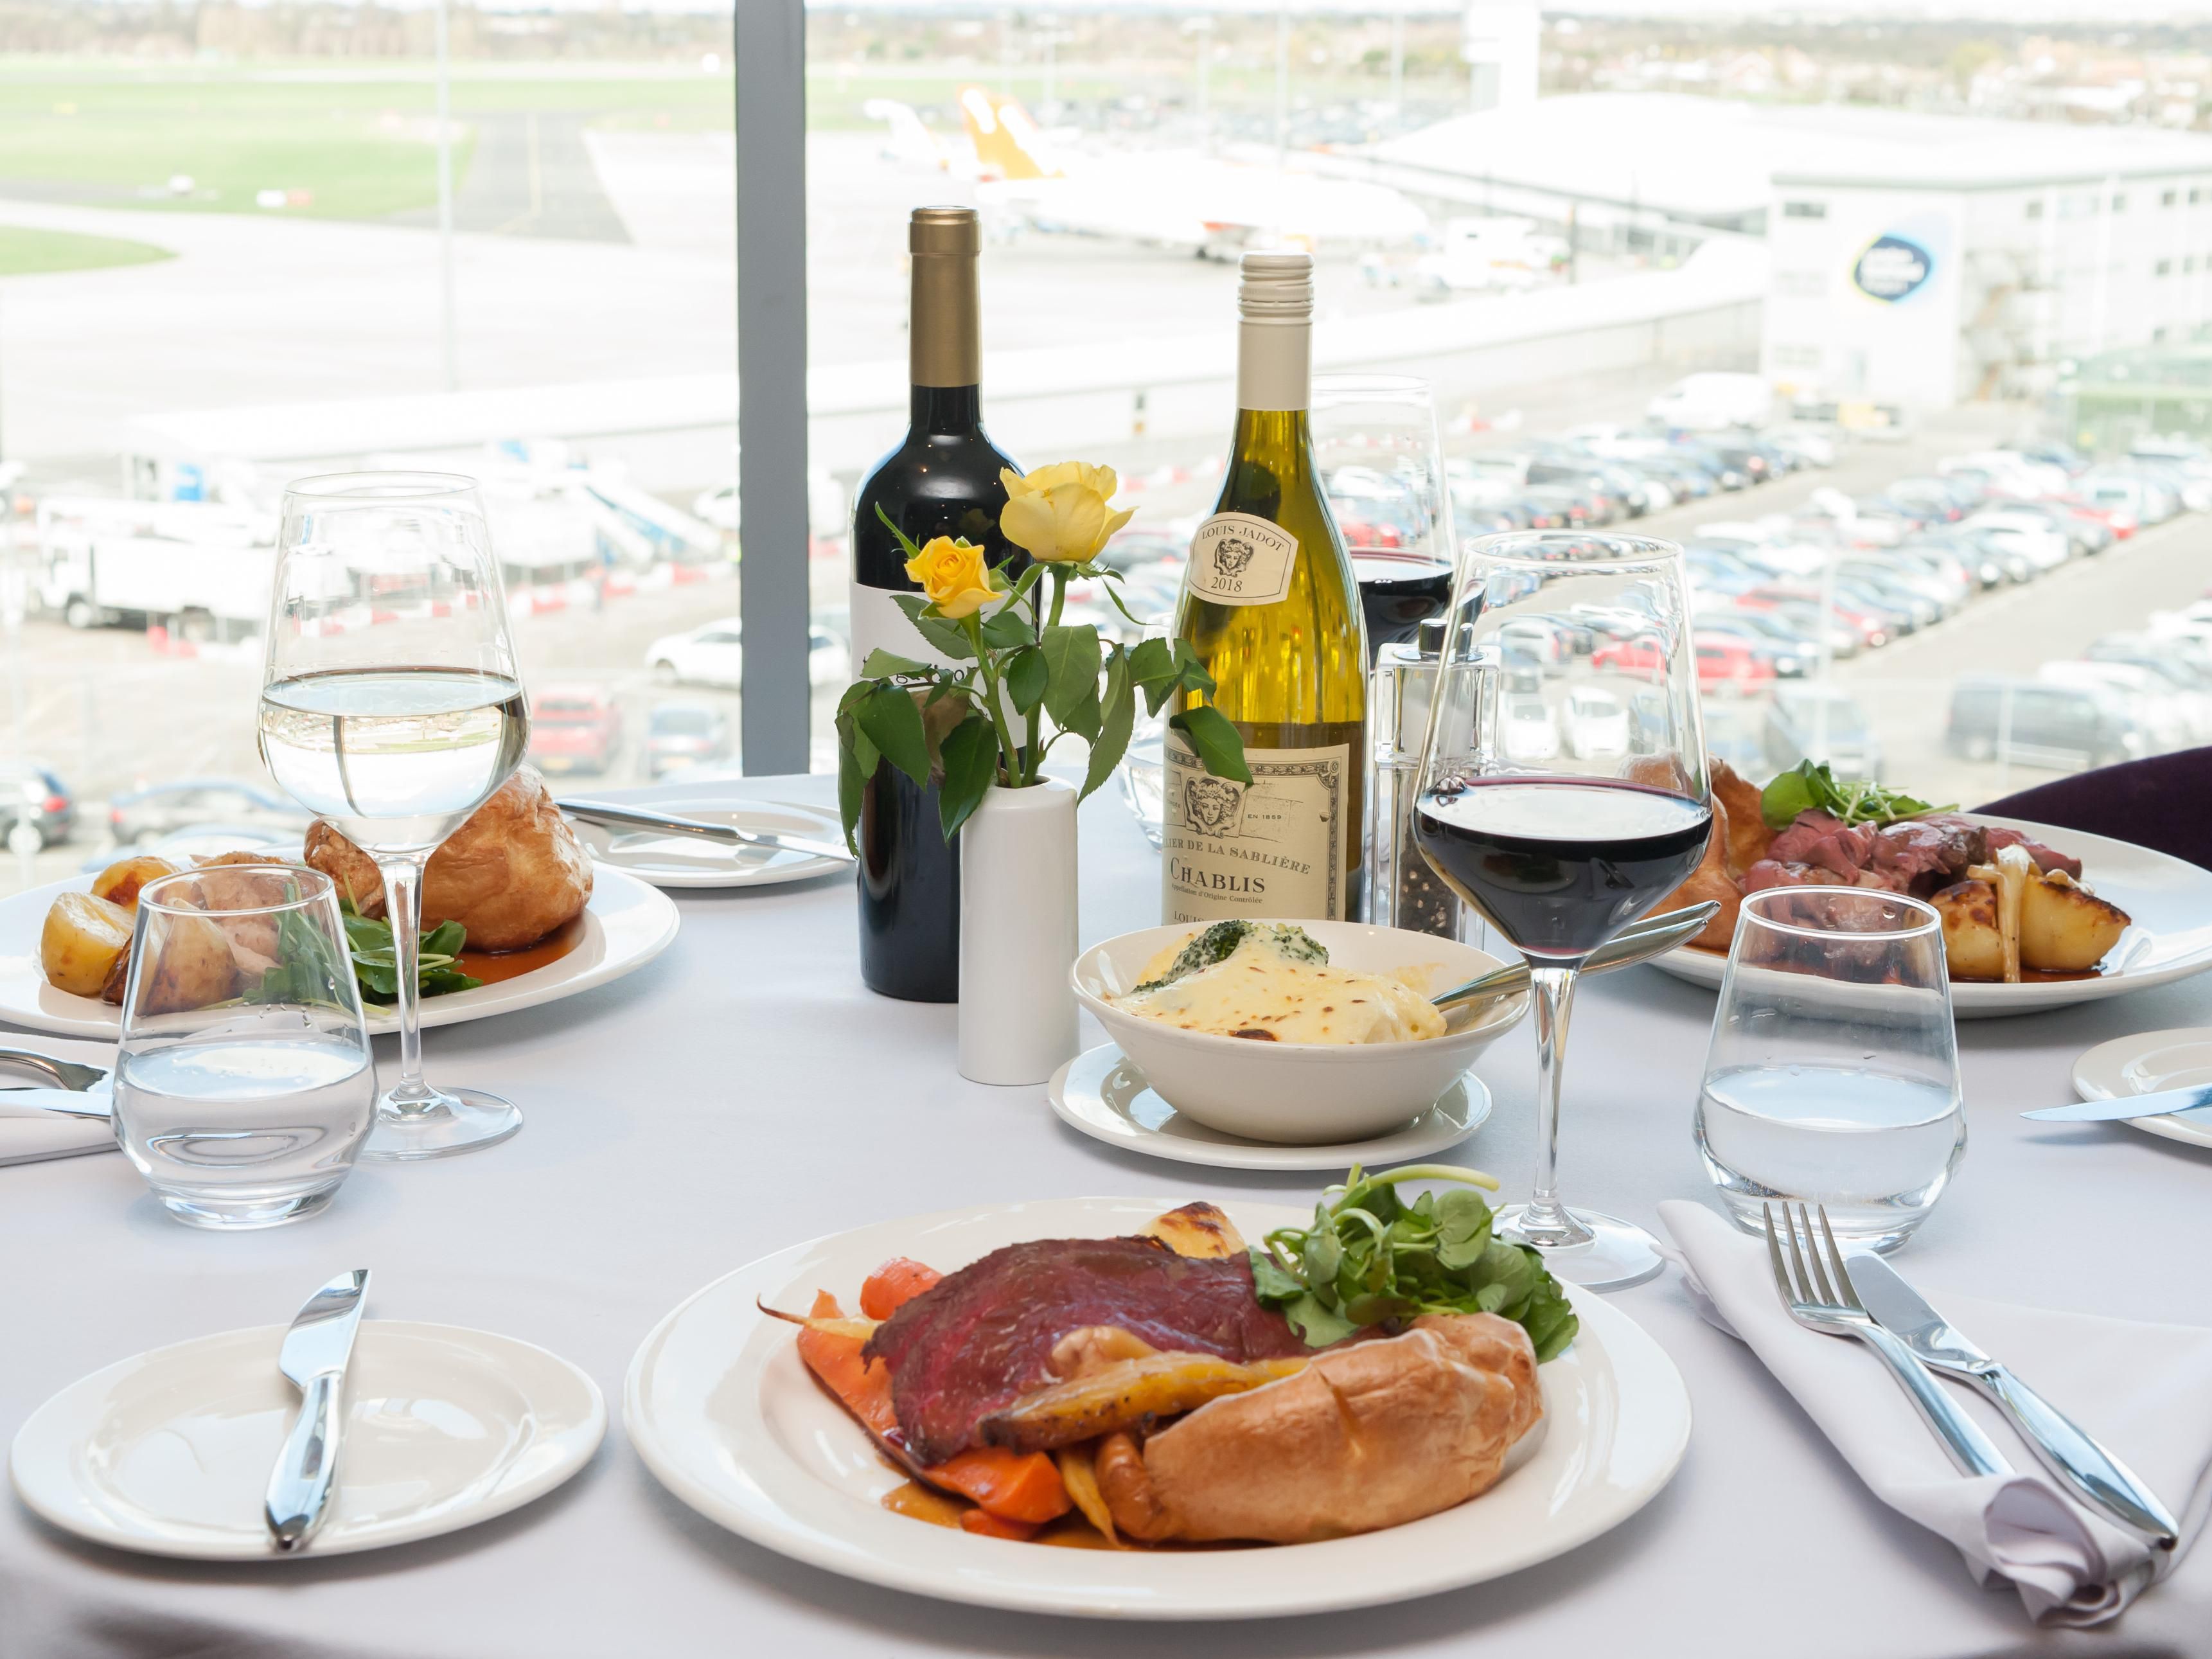 Situated just a short walk from Southend Airport train station and with ample free on-site car parking, the fully soundproofed rooftop restaurant & bar offers great food, a great atmosphere and wonderful views over the runway of London Southend Airport. Indulge in traditional British dishes cooked to perfection with a modern twist.
